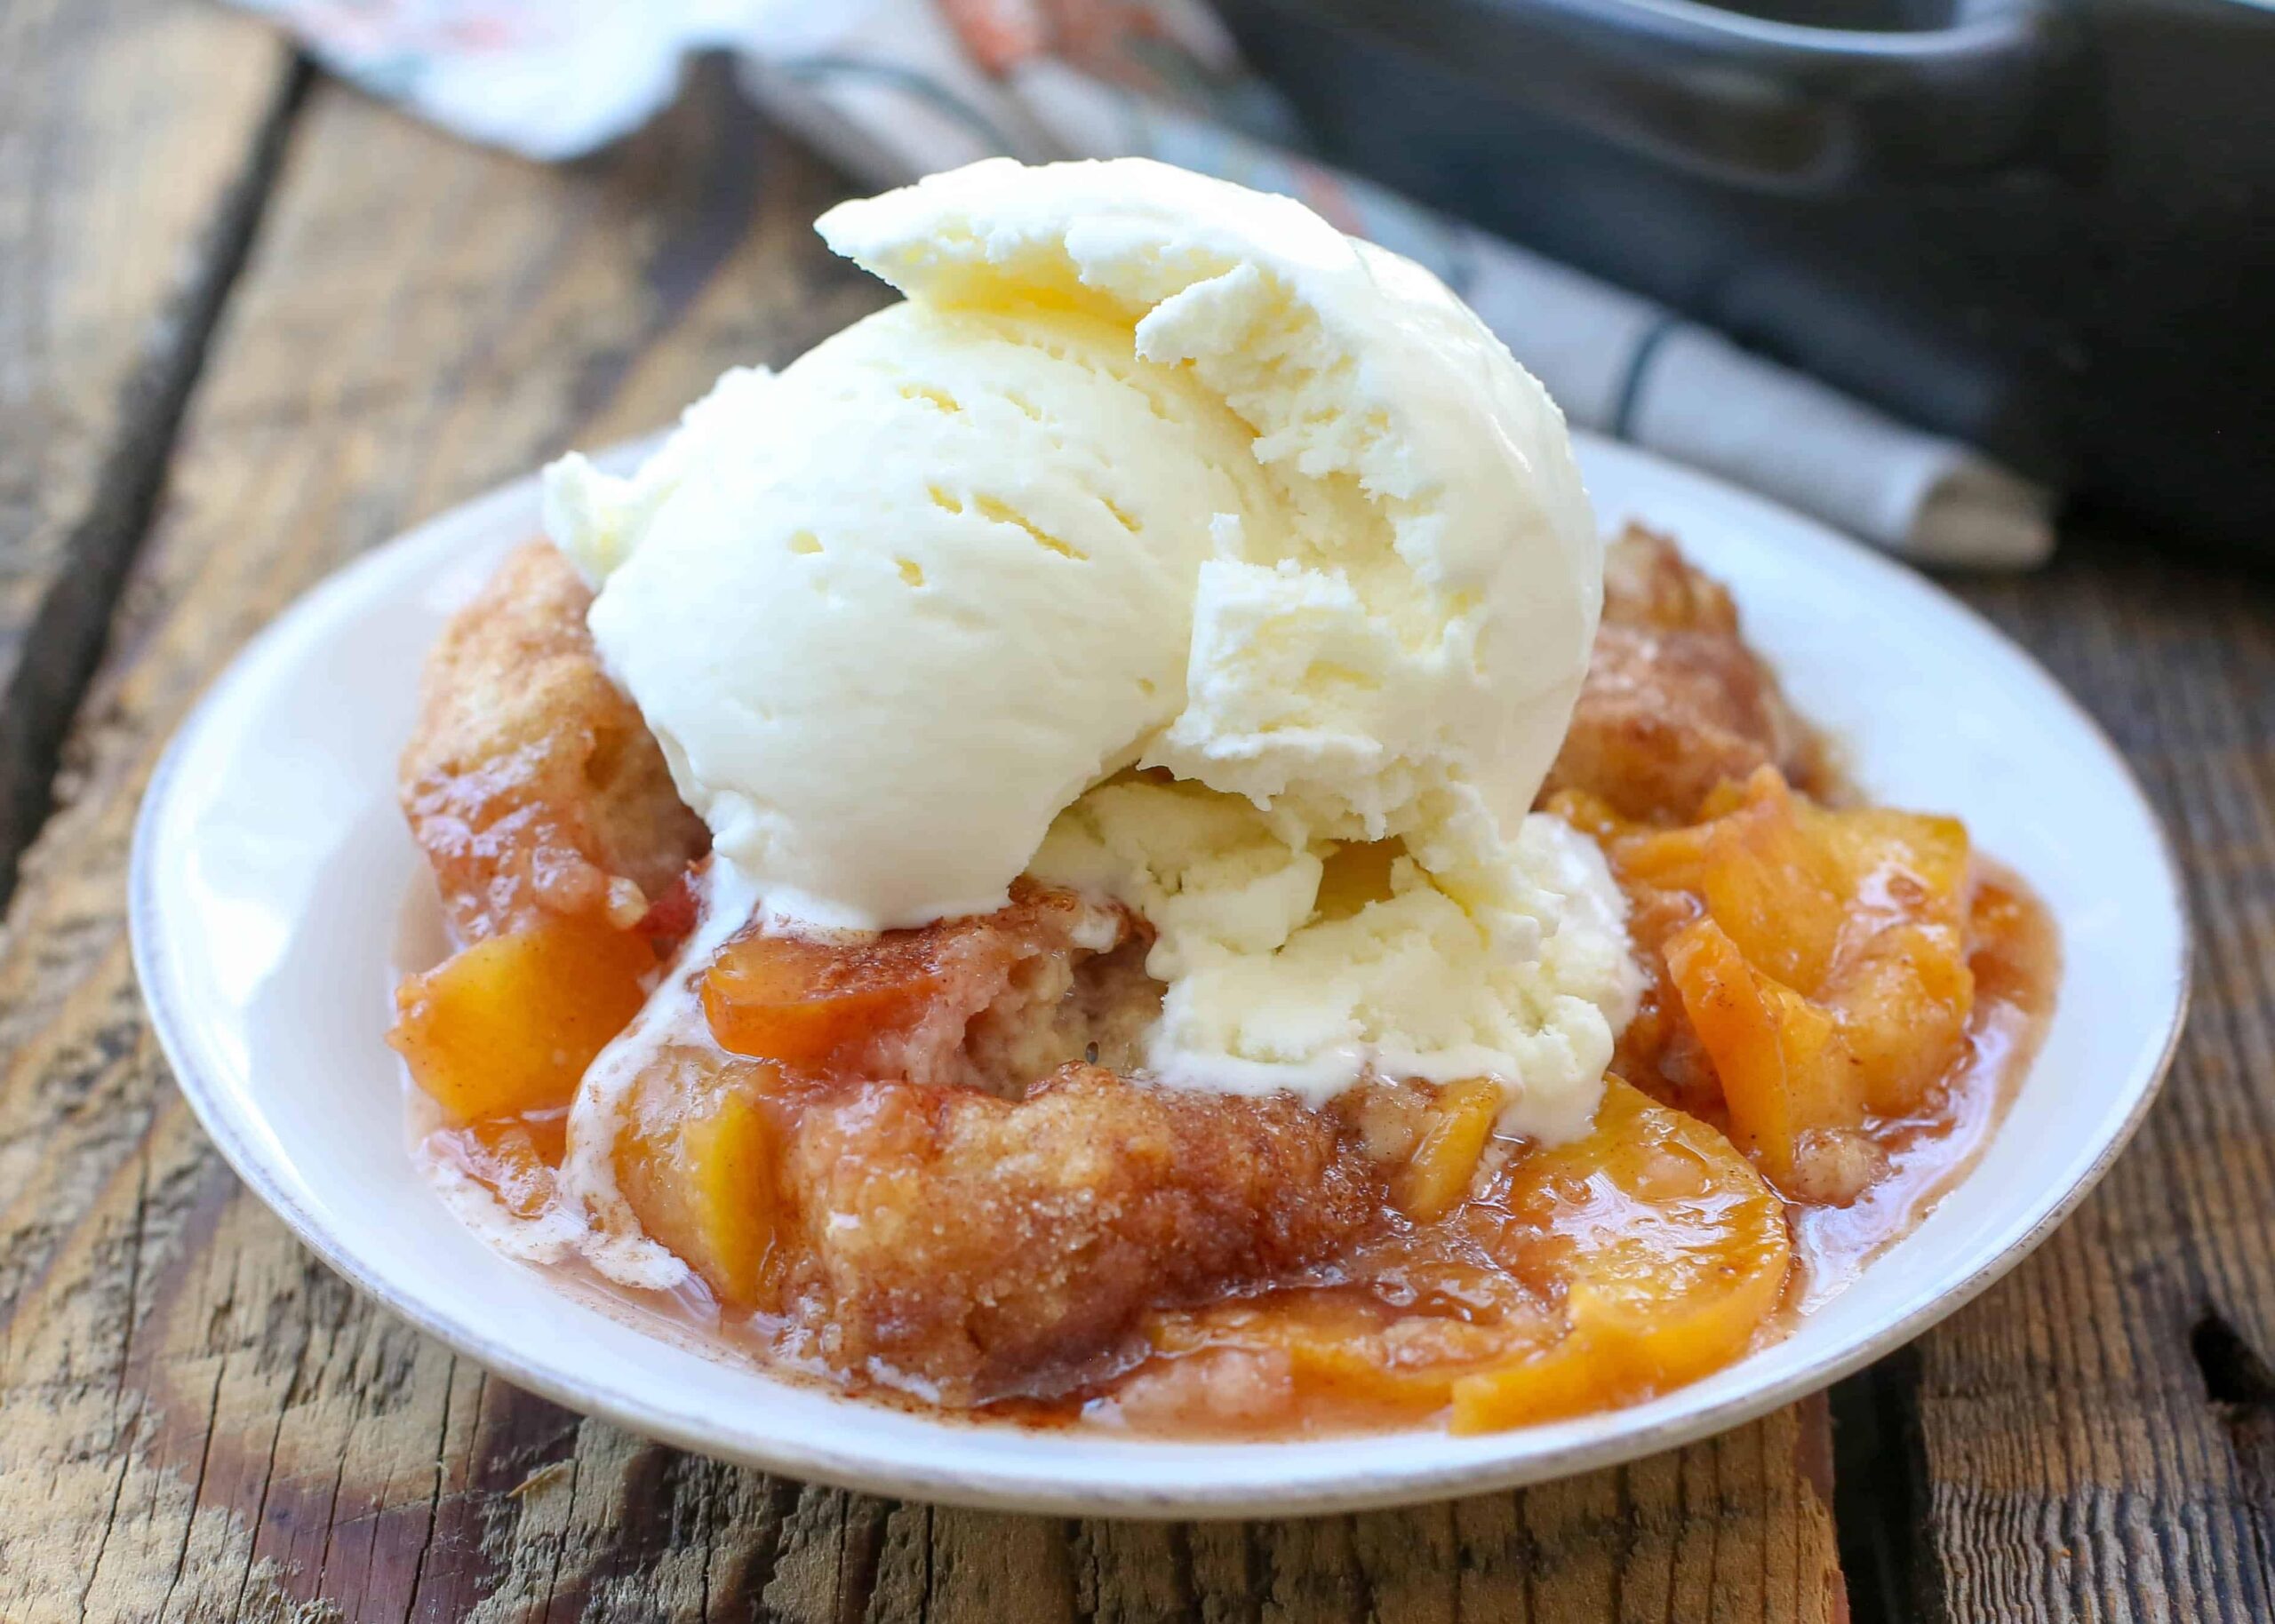  Give your taste buds the treat they deserve with this juicy peach shortcake.